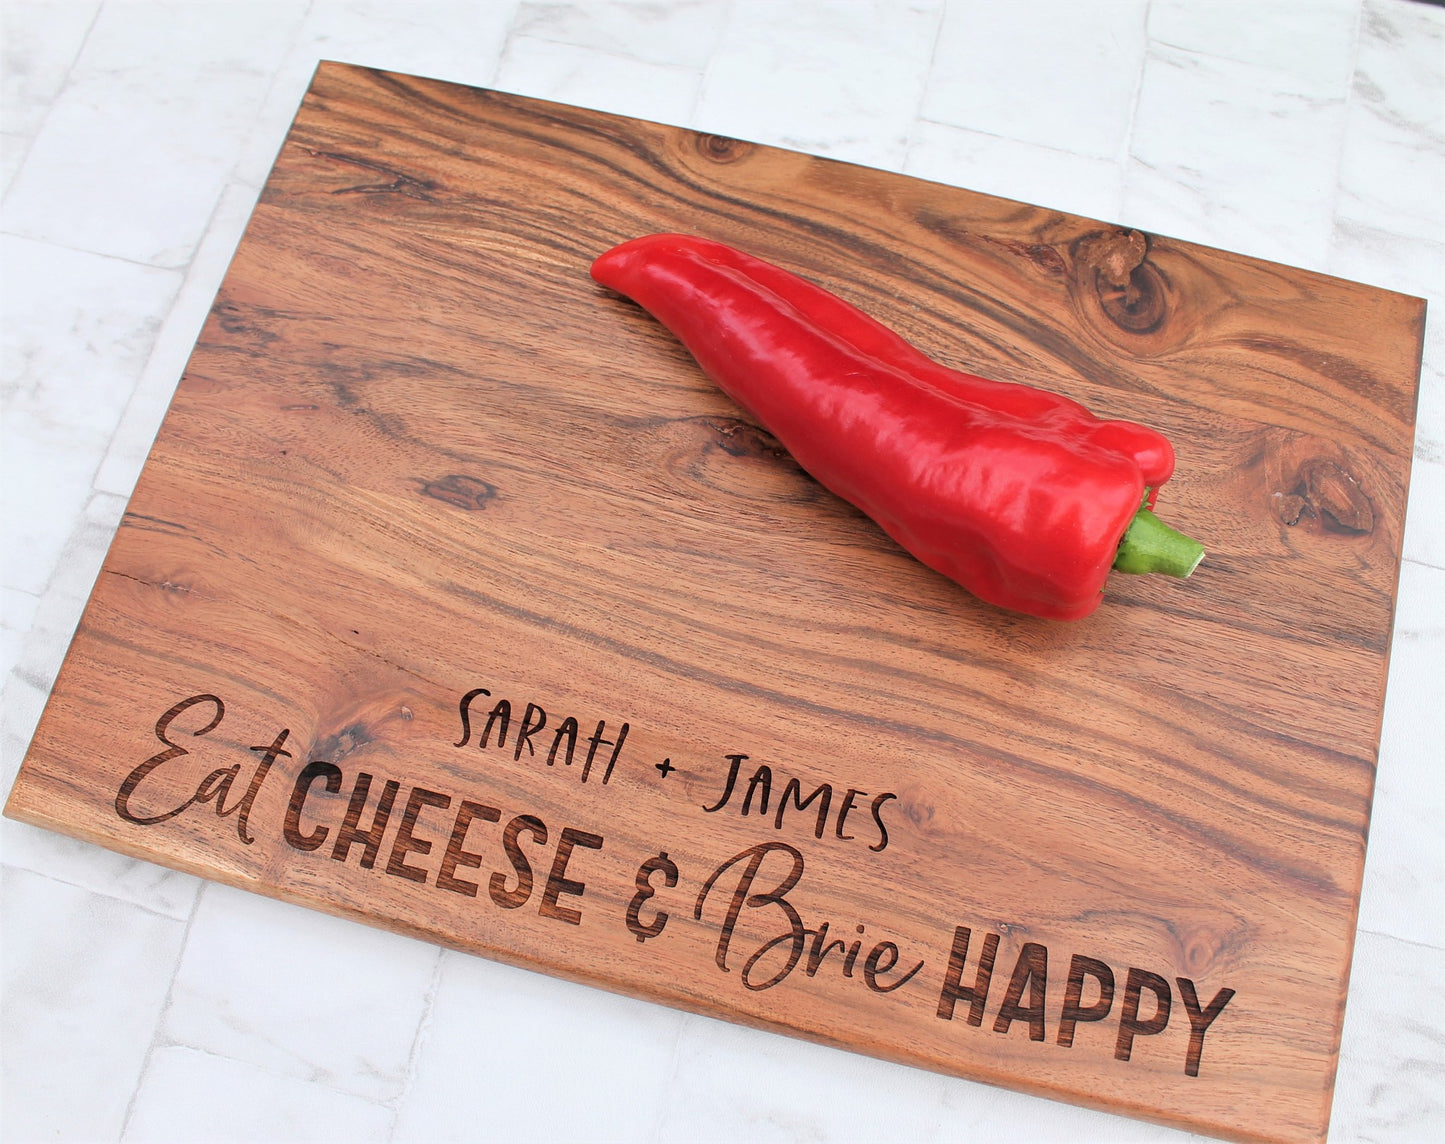 Personalised wooden cheese serving board engraved with custom names and funny brie quote: eat cheese and brie happy